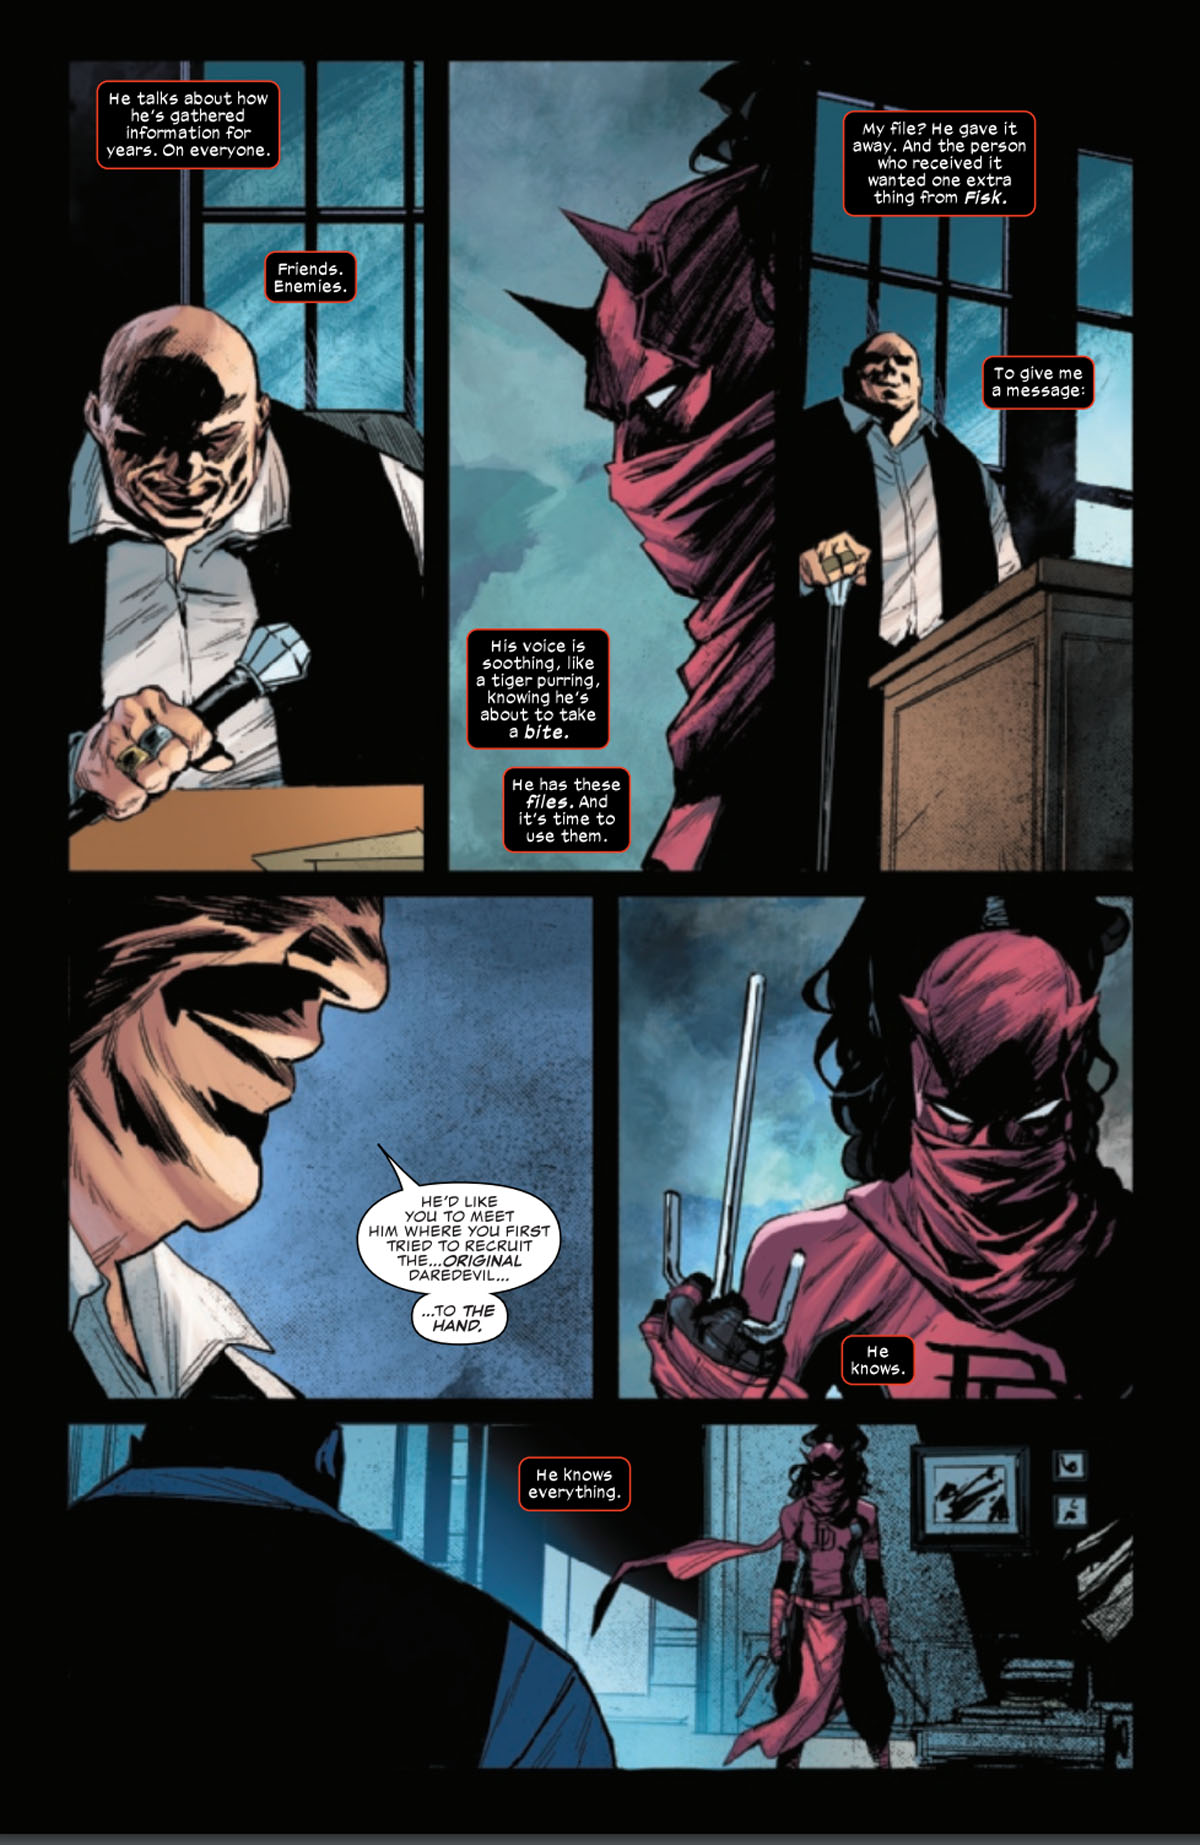 Daredevil: Woman Without Fear #1 page 2